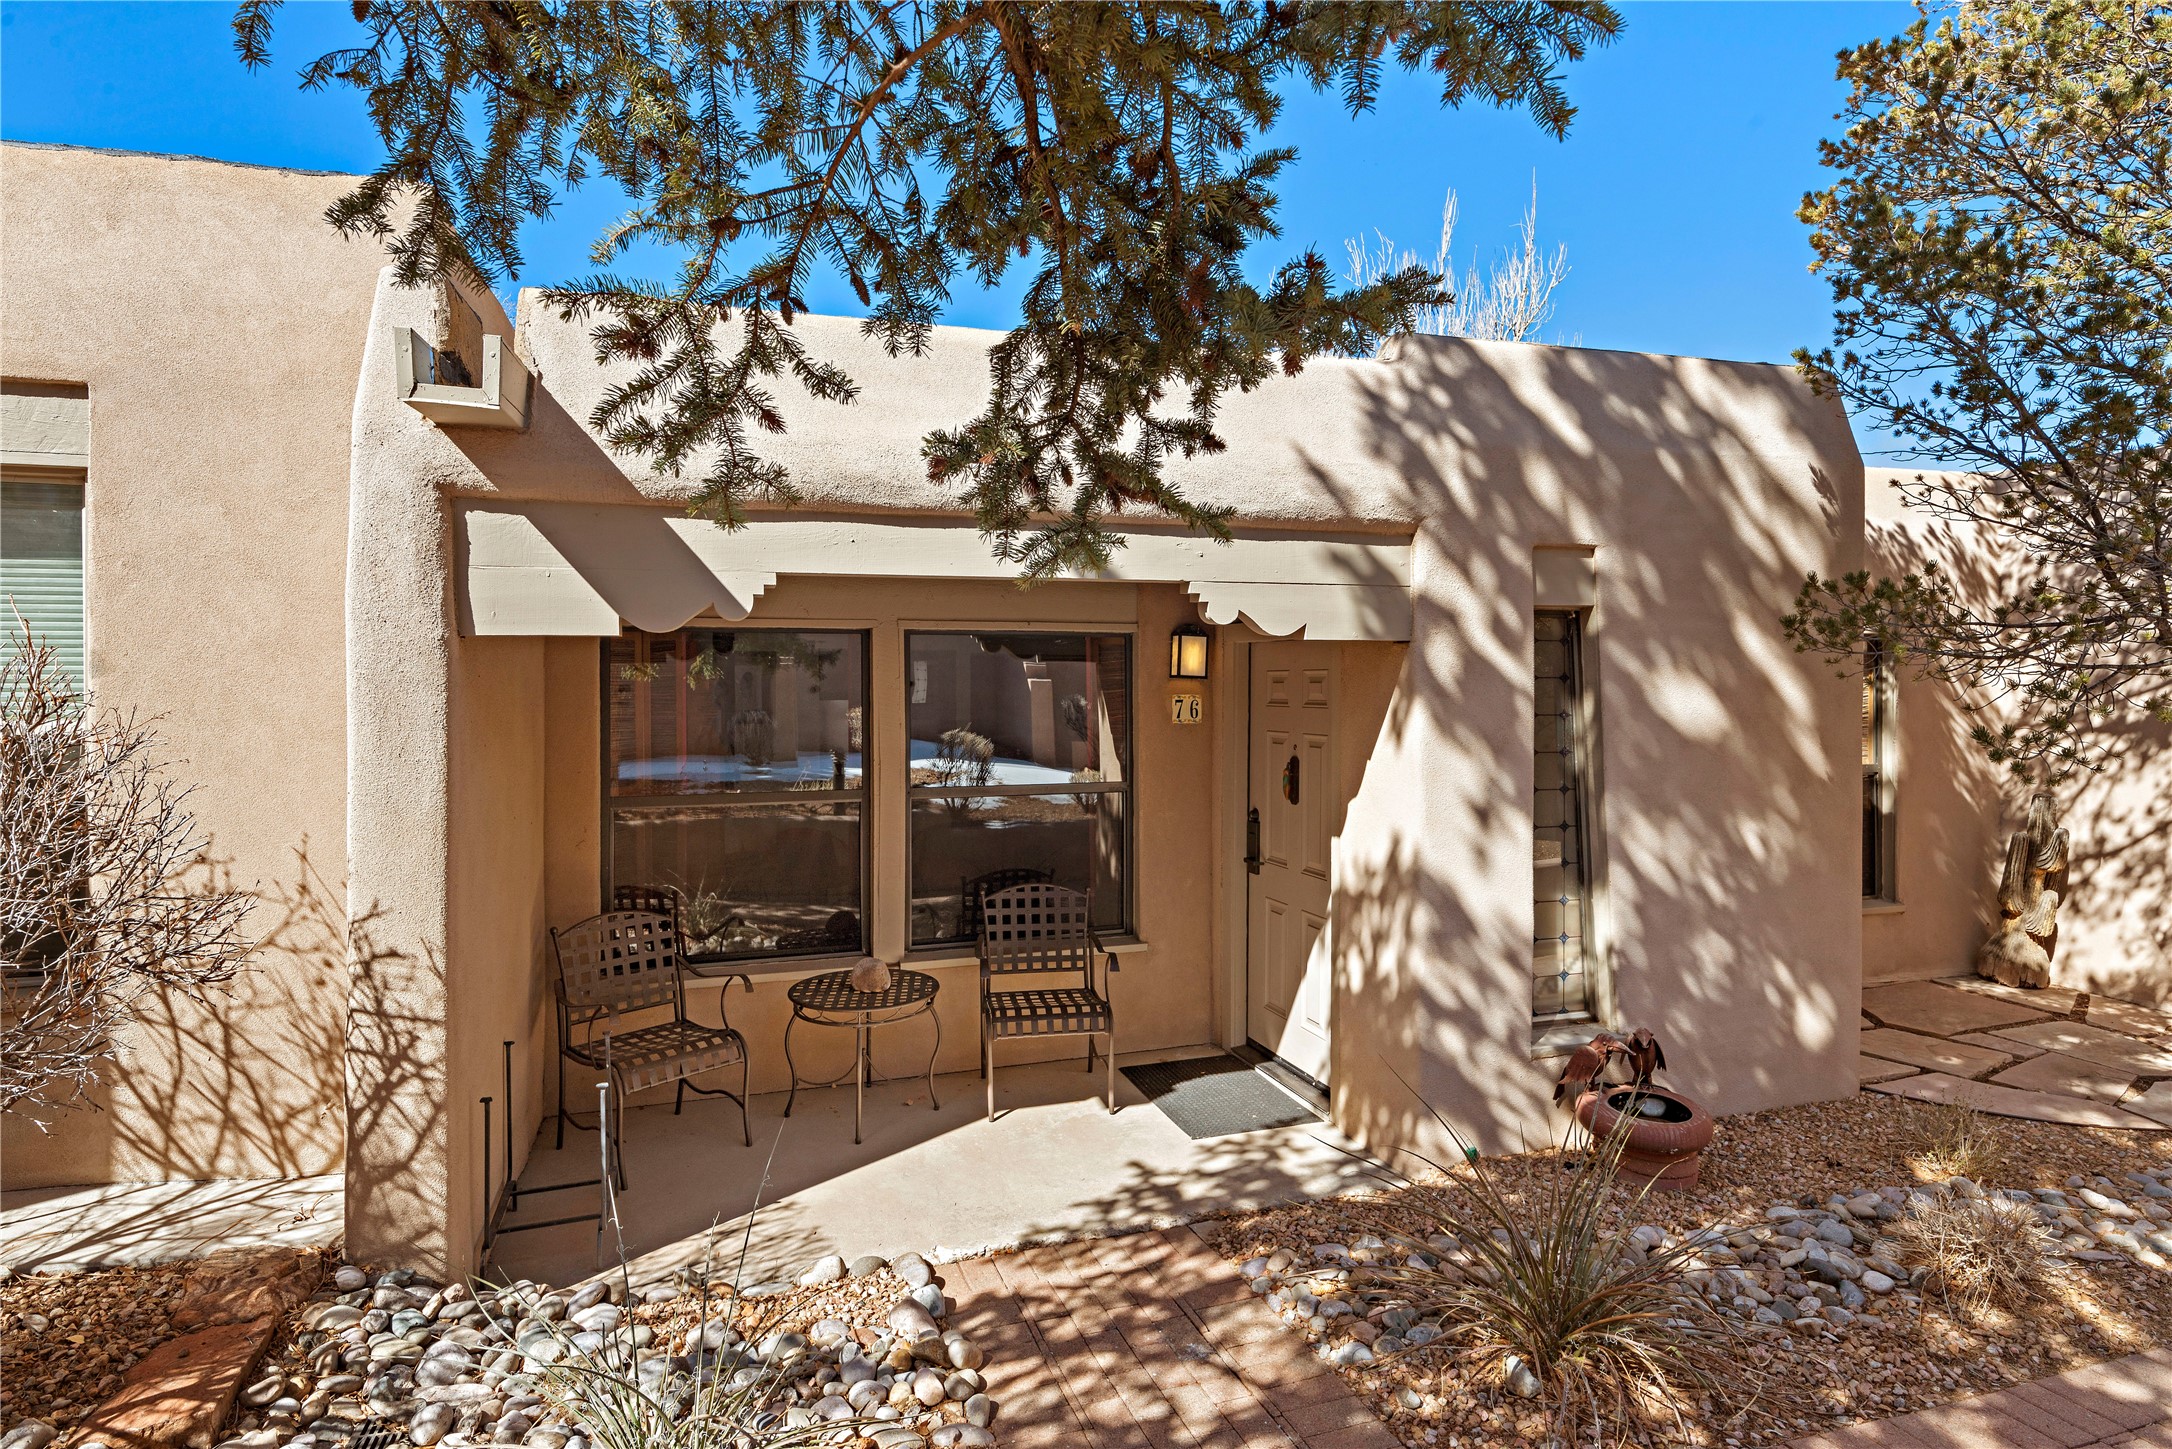 320 Artist Rd #76, Santa Fe, New Mexico 87501, 1 Bedroom Bedrooms, ,1 BathroomBathrooms,Residential,For Sale,320 Artist Rd #76,202232162